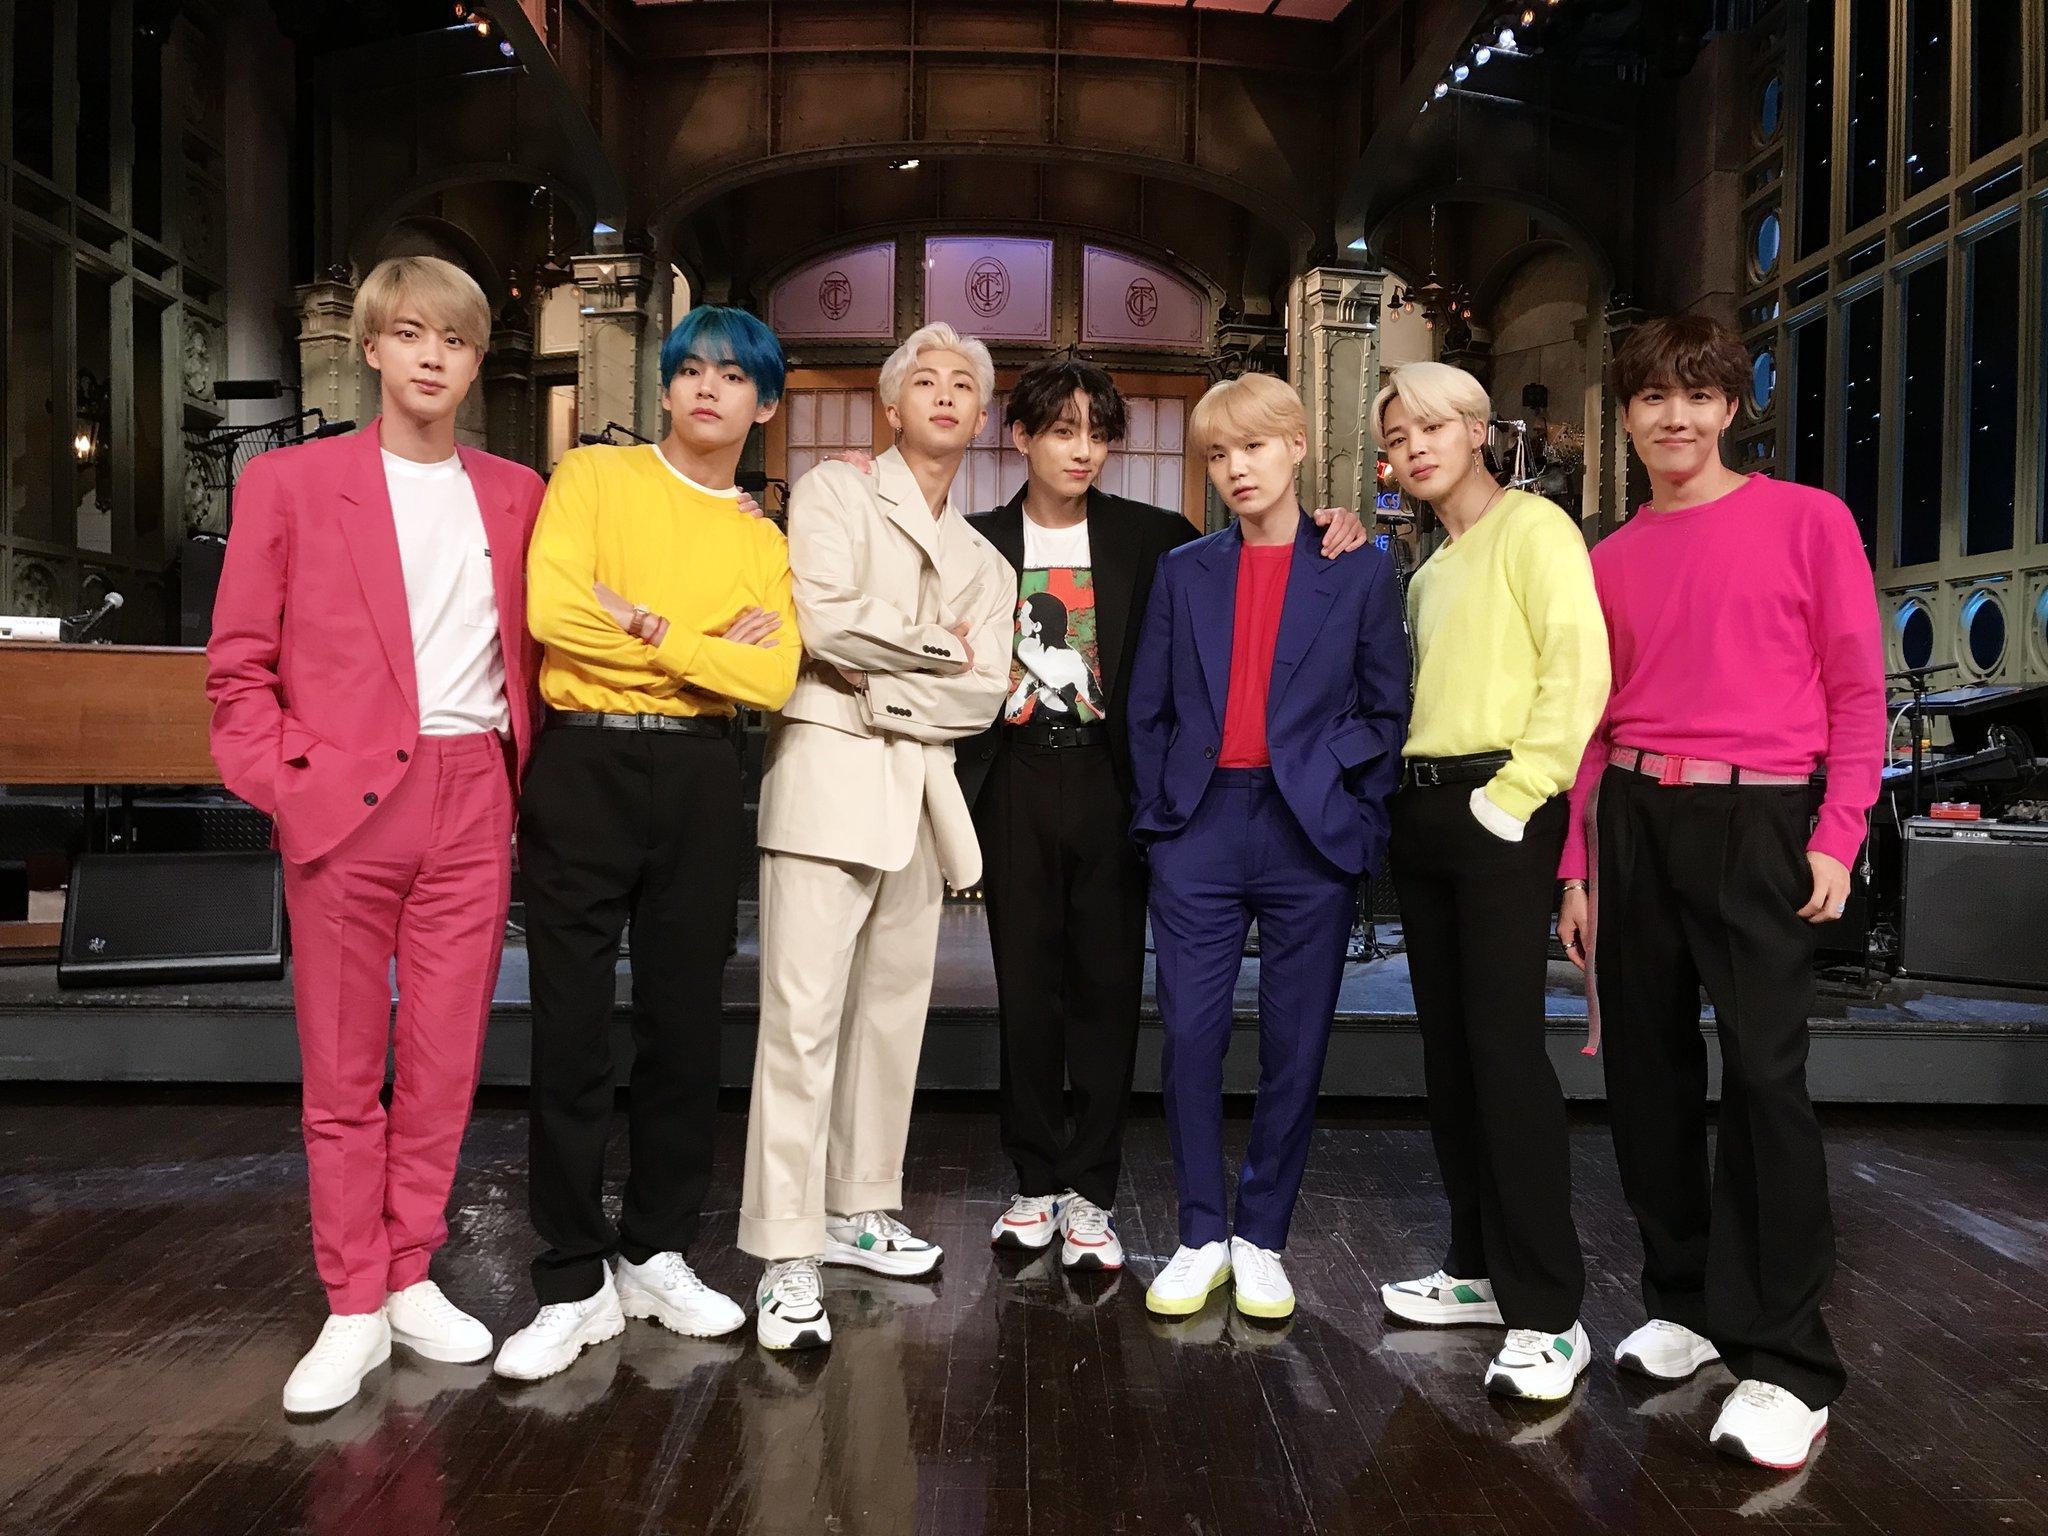 BTS Confirms 'Boy With Luv' Performance With Halsey On Billboard